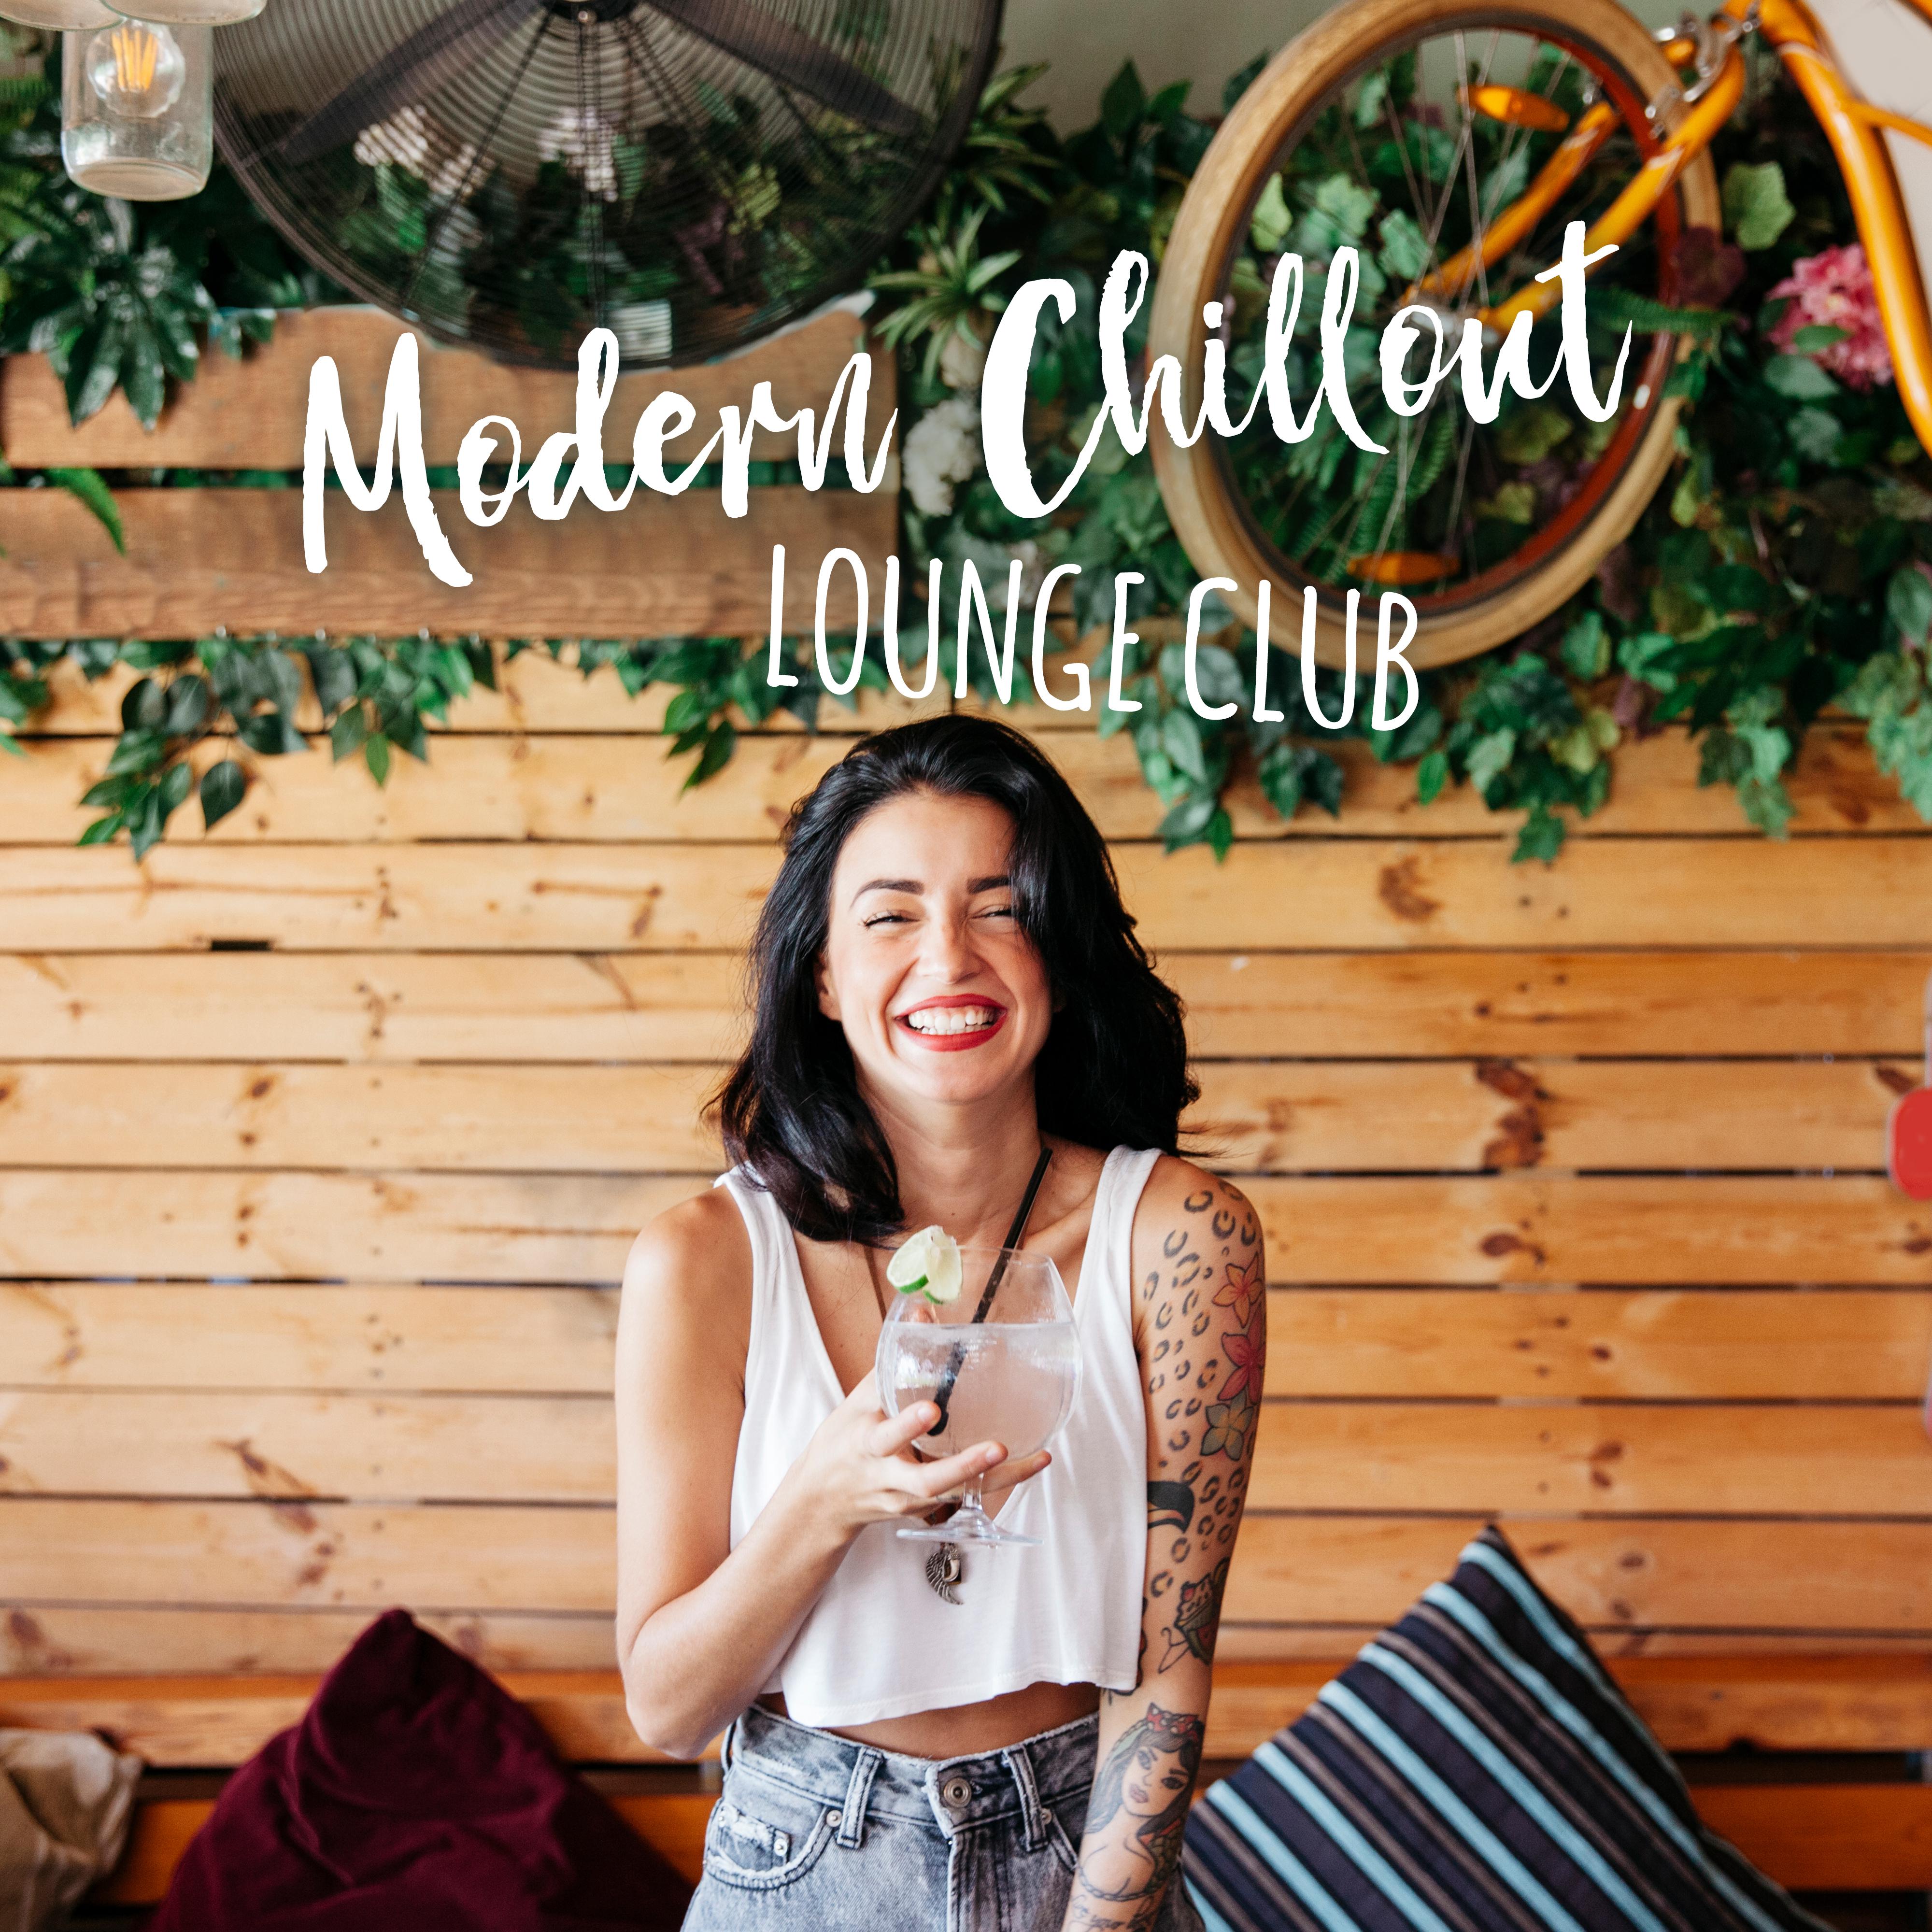 Modern Chillout Lounge Club: Selection of Fresh 2019 Chillout Music, Energetic Deep Beats & Electro Melodies, Perfect Chill Out Club Mix